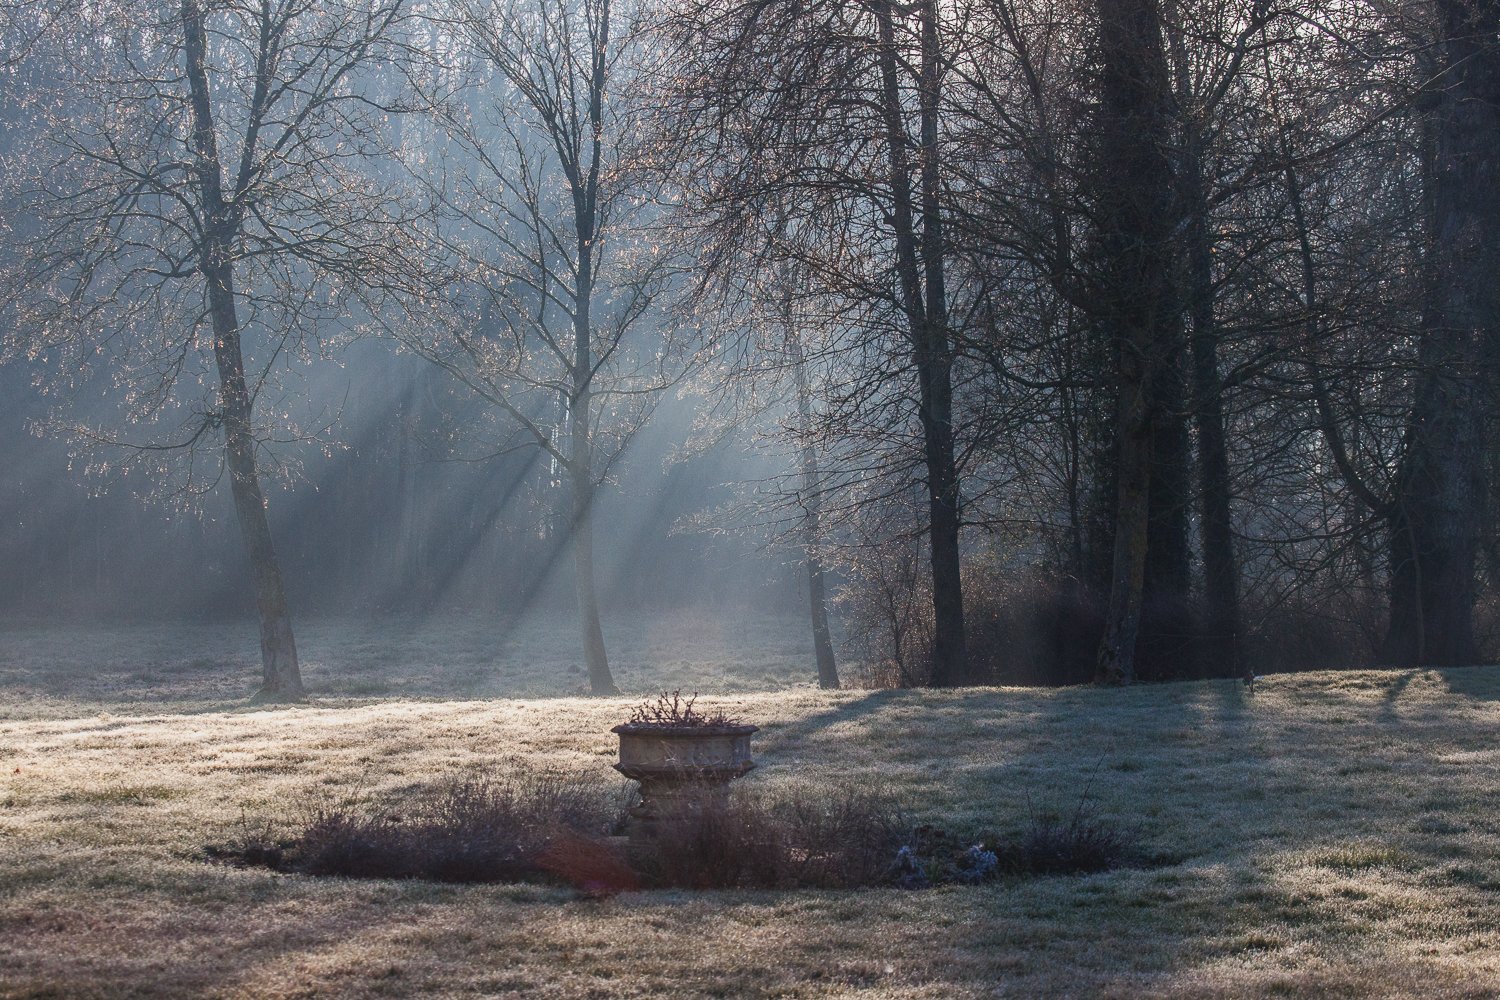 Sunbeams shine through the trees in a frosty field on the grounds of Chateau de Courtomer.